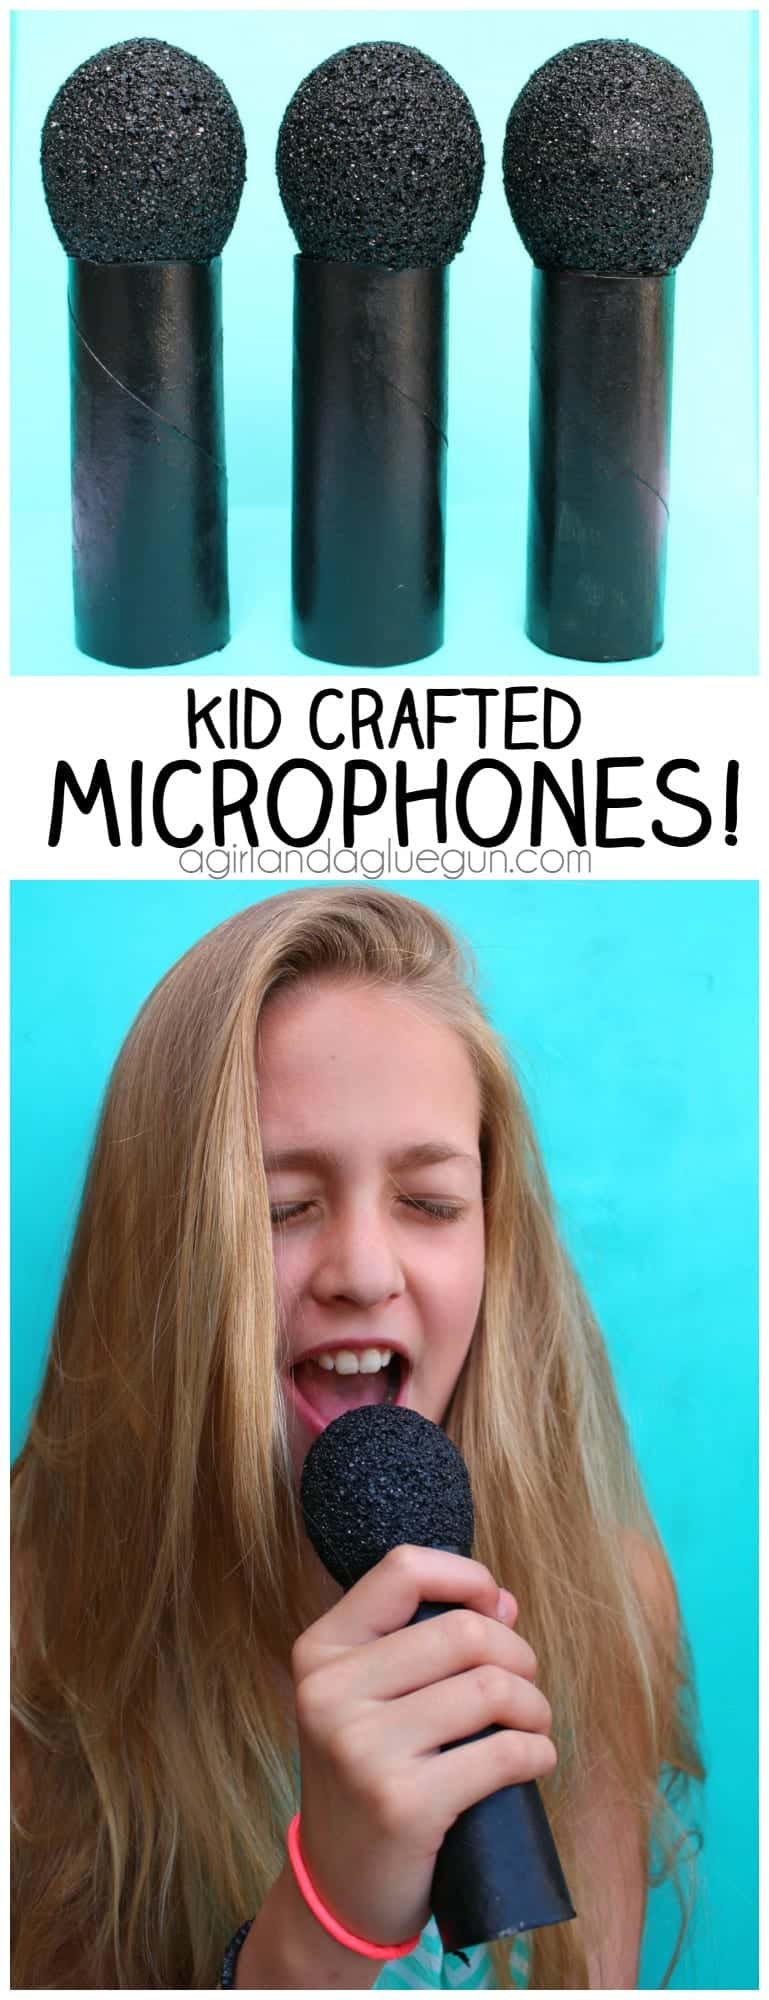 kid crafted microphone made from toilet paper and styrogoam